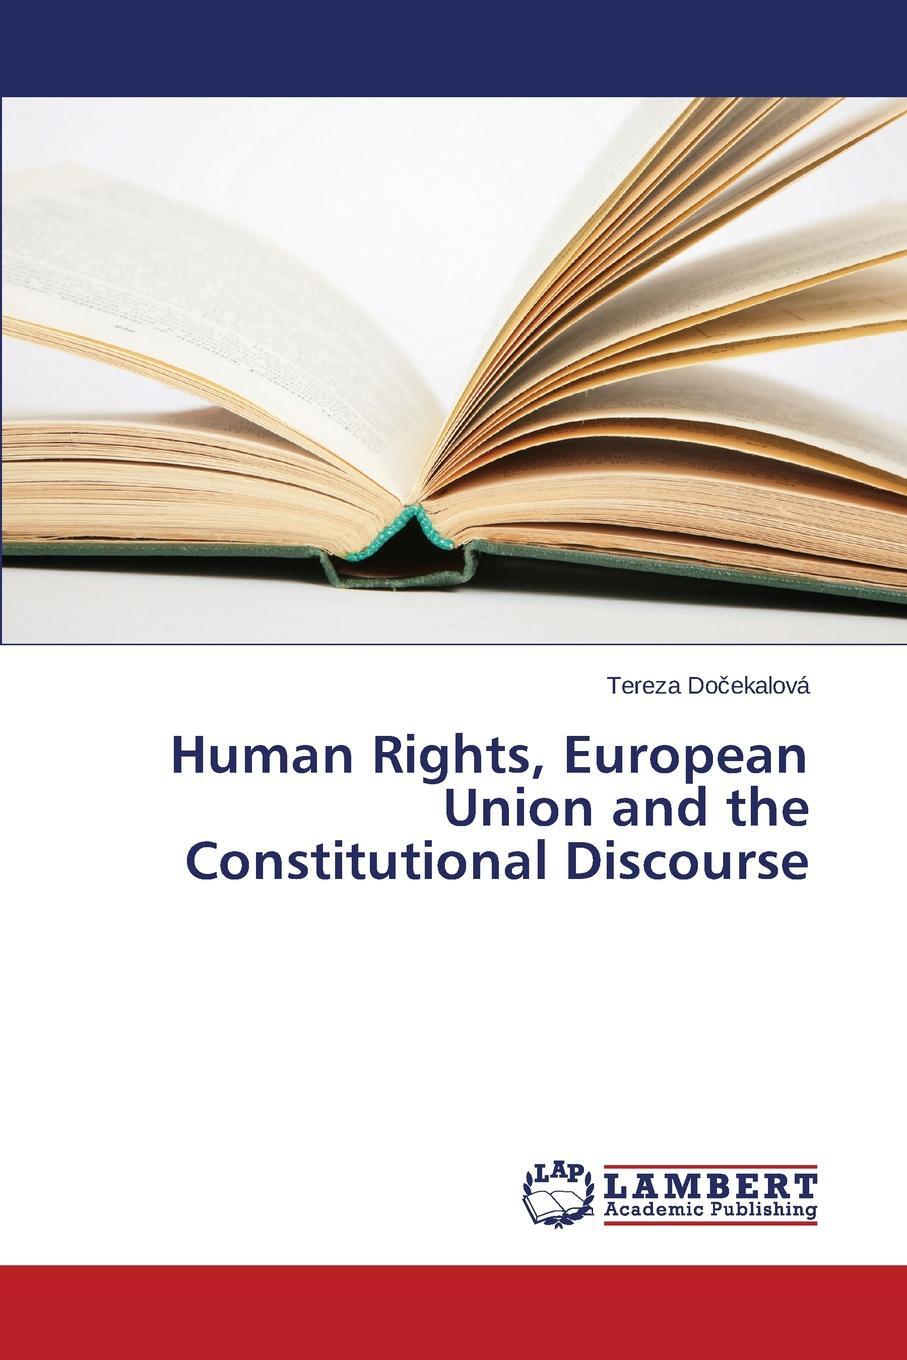 фото Human Rights, European Union and the Constitutional Discourse